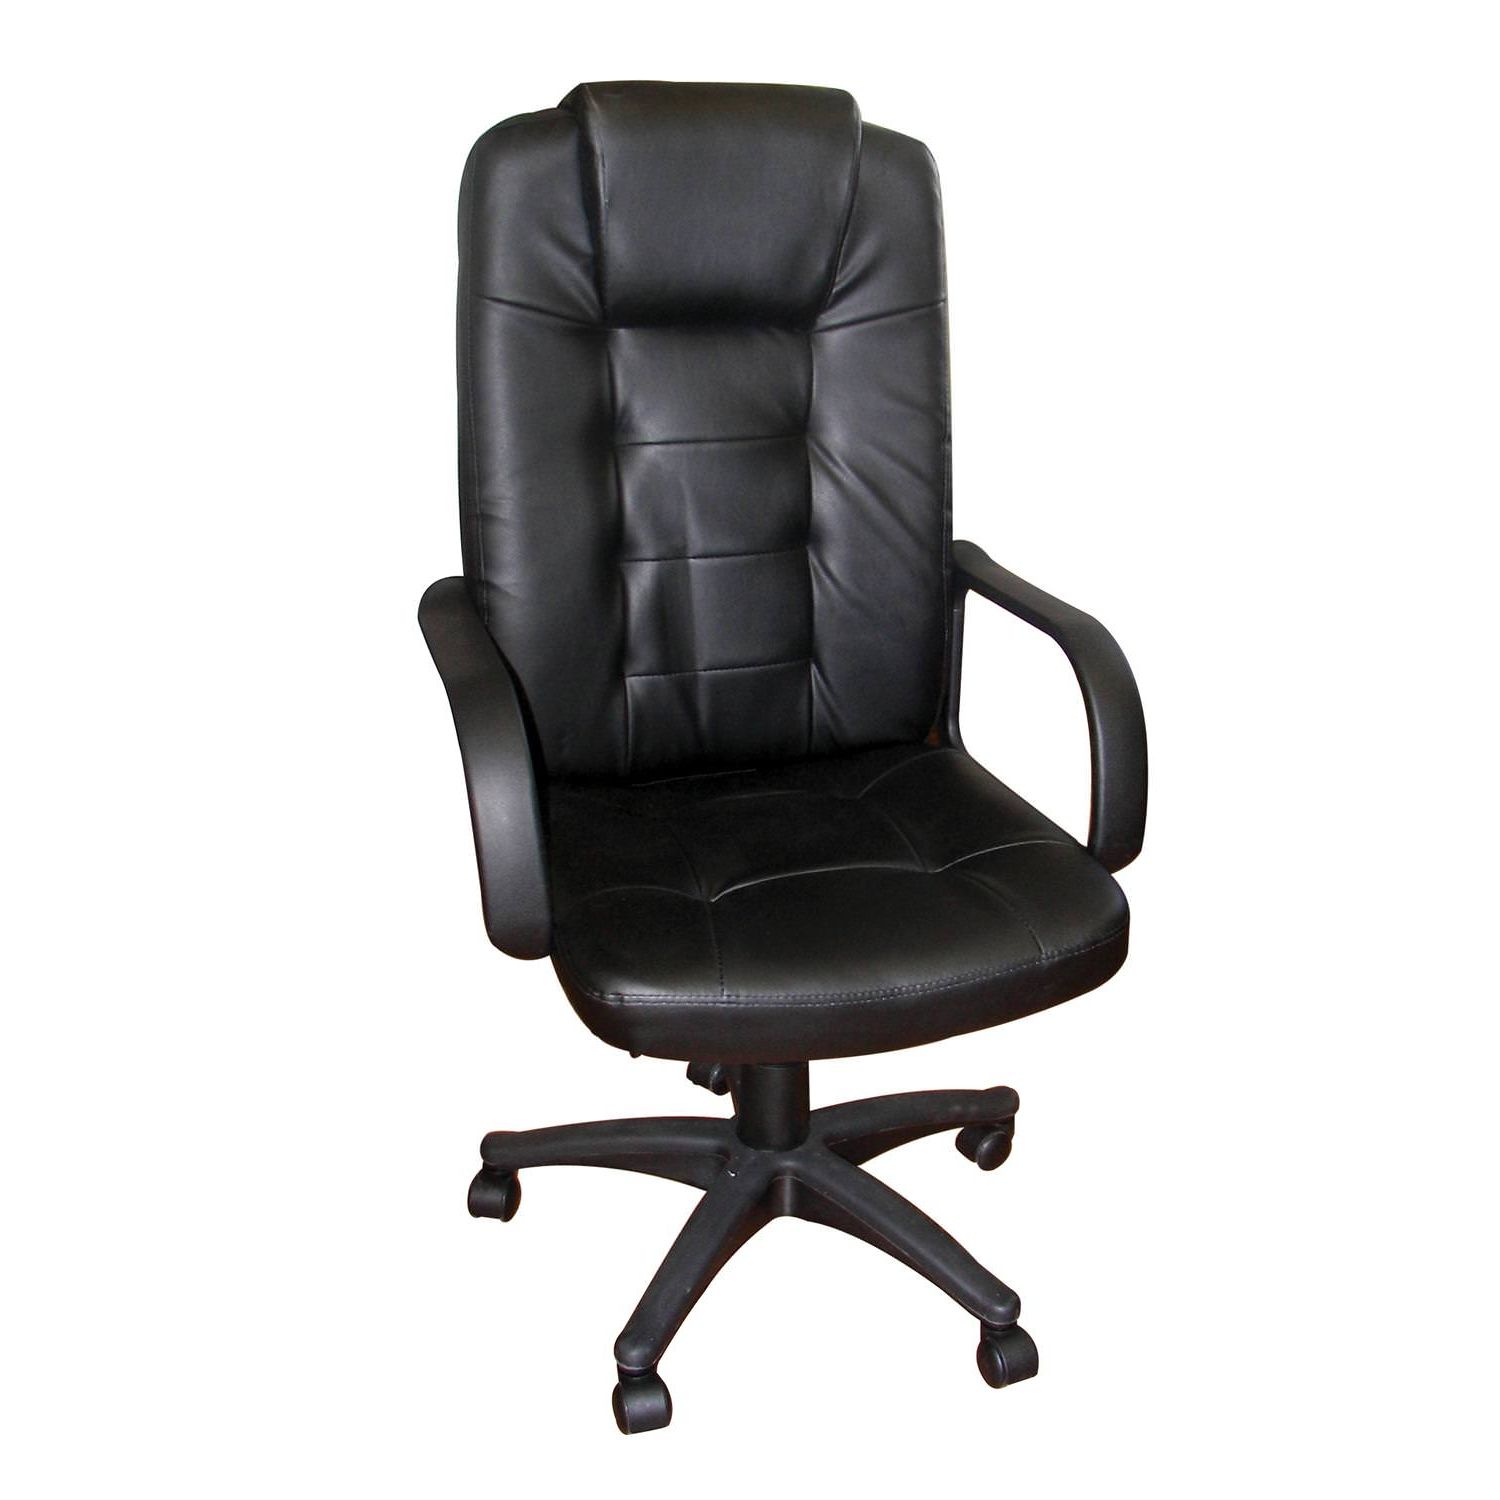 Black Faux Leather Swivel Recliners Intended For Current Home Source Bradley Black Faux Leather Swivel Office Chair With  (View 9 of 10)